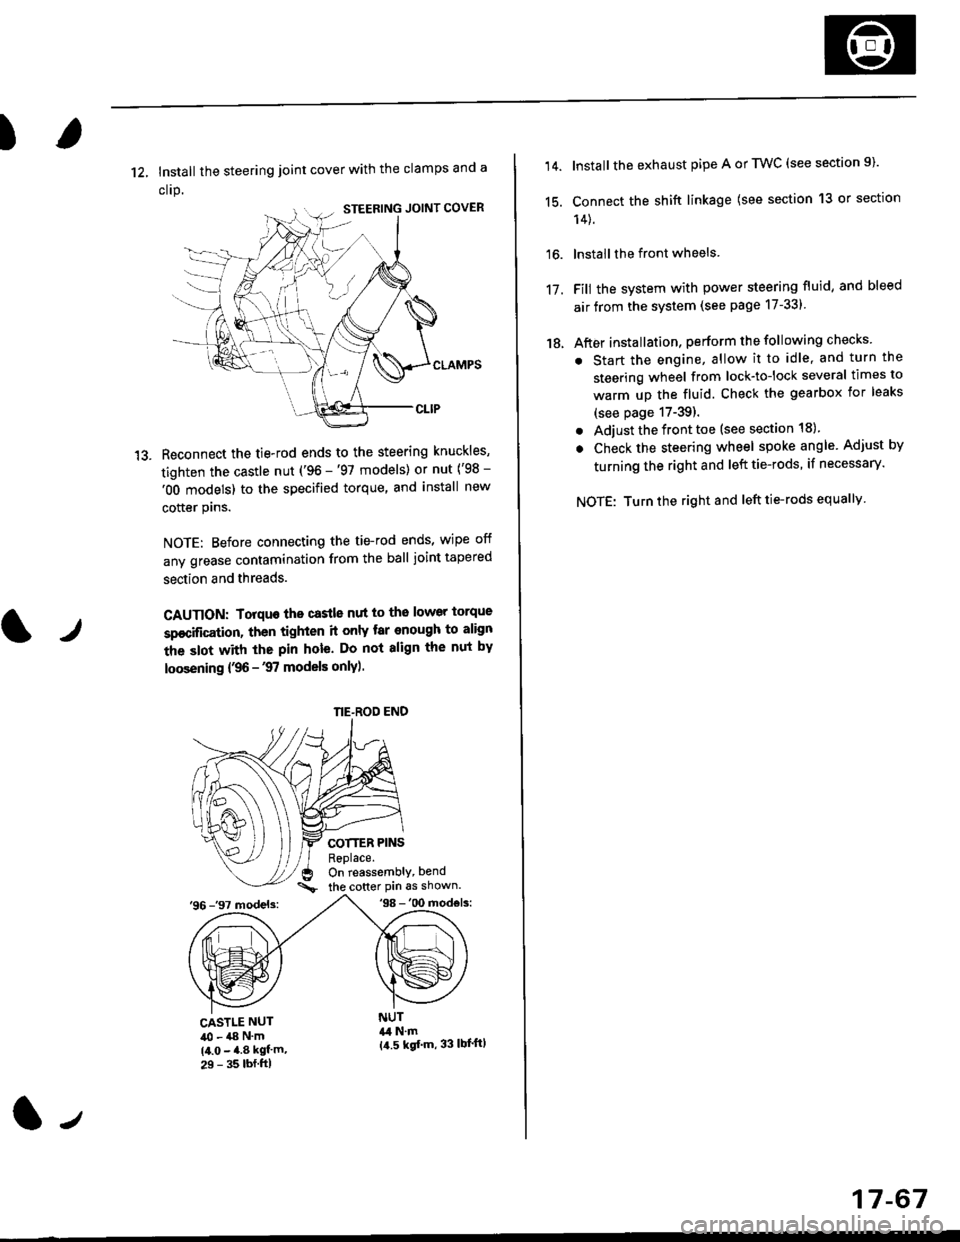 HONDA CIVIC 1996 6.G Service Manual )
1?
12, Install the steering joint cover with the clamps and a
clrp.
Reconnect the tie-rod ends to the steering knuckles,
tighten the castle nut (96 -97 models) or nut (98 -
OO models) to the spe